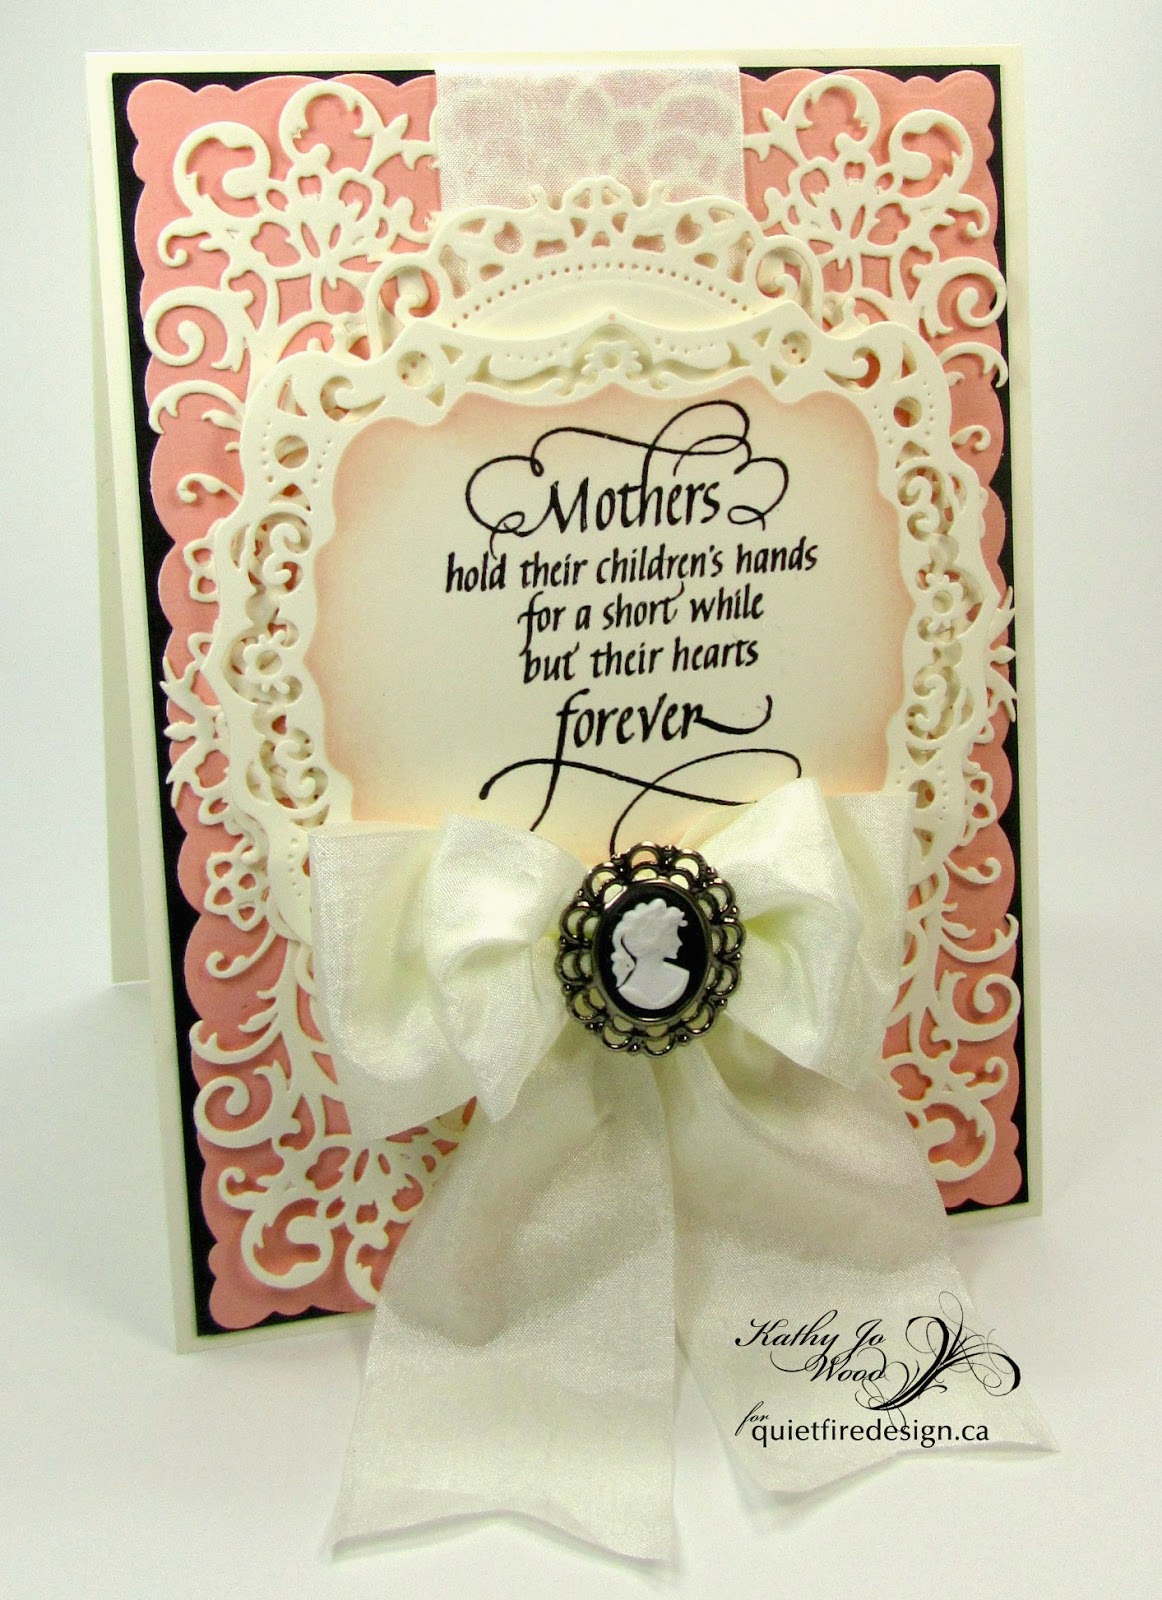 Quietfire Design, Mother's Day, card, mothers hold childrens hands, spellbinders, distress ink, labels 39, floral ovals, devine floral, romantic rose